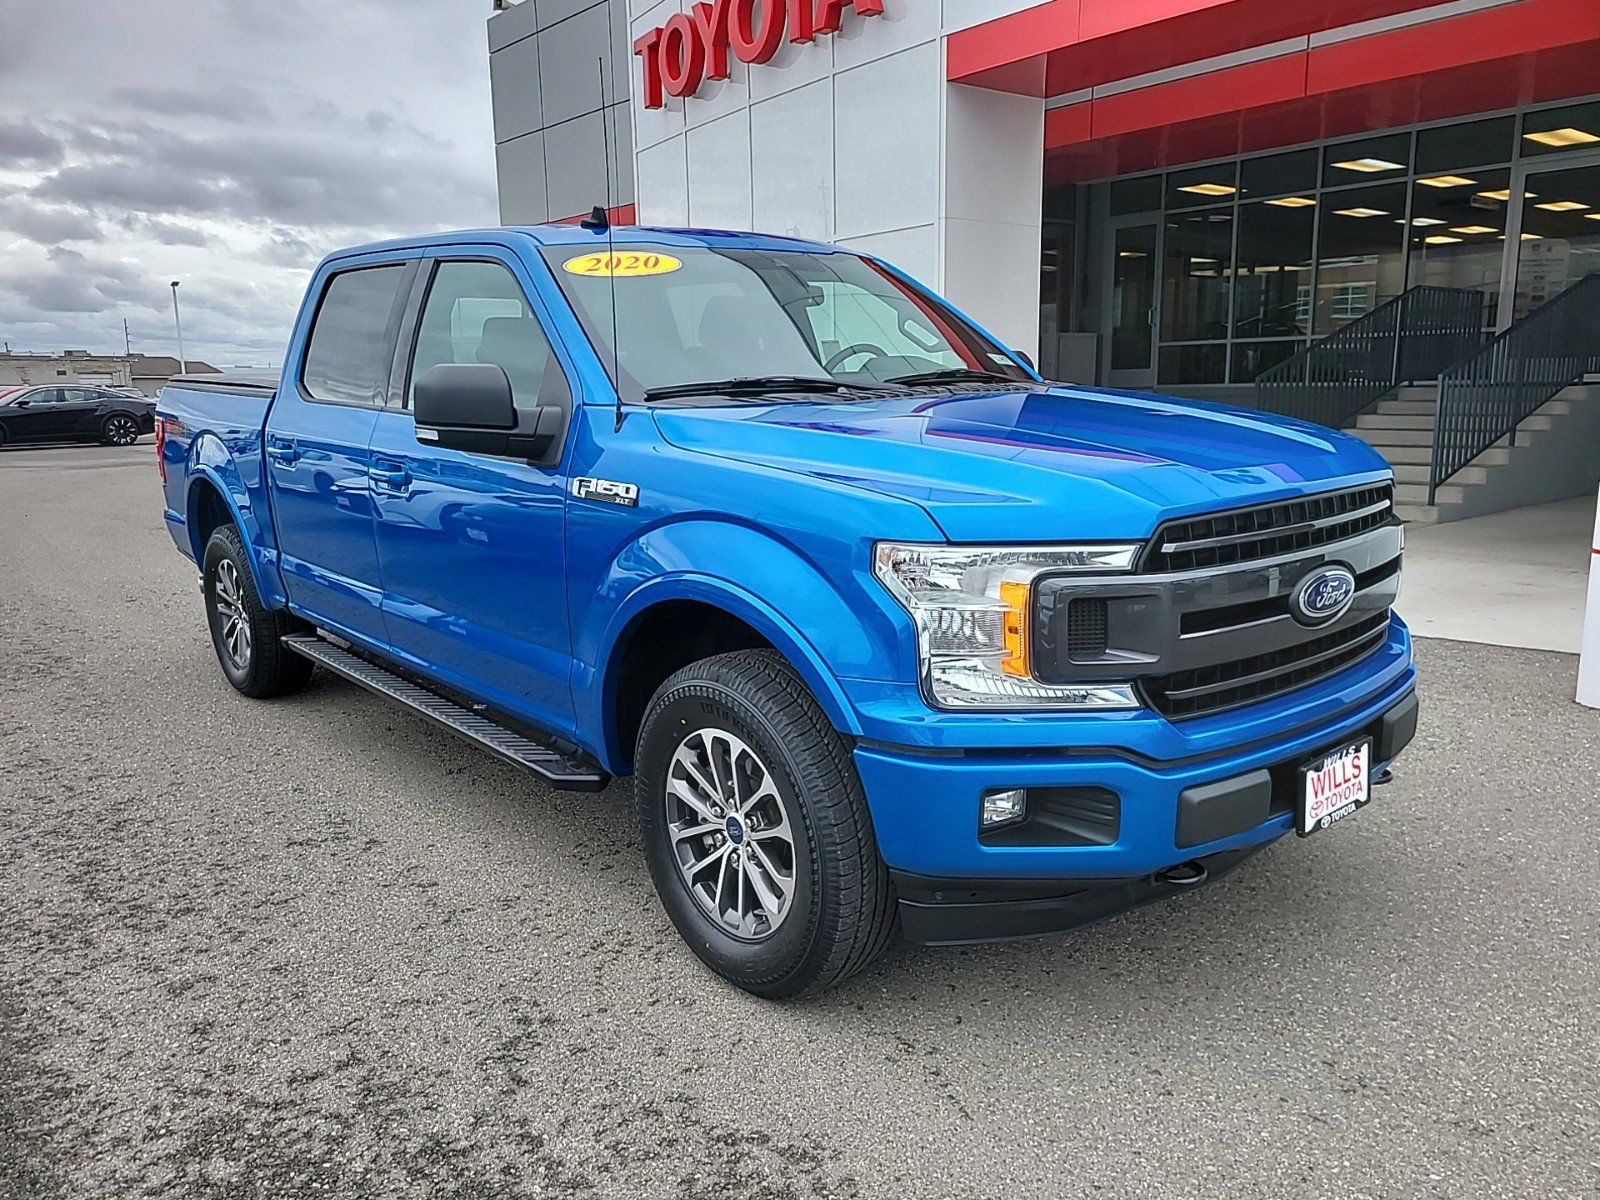 2020 - Ford - F-150 - $37,799